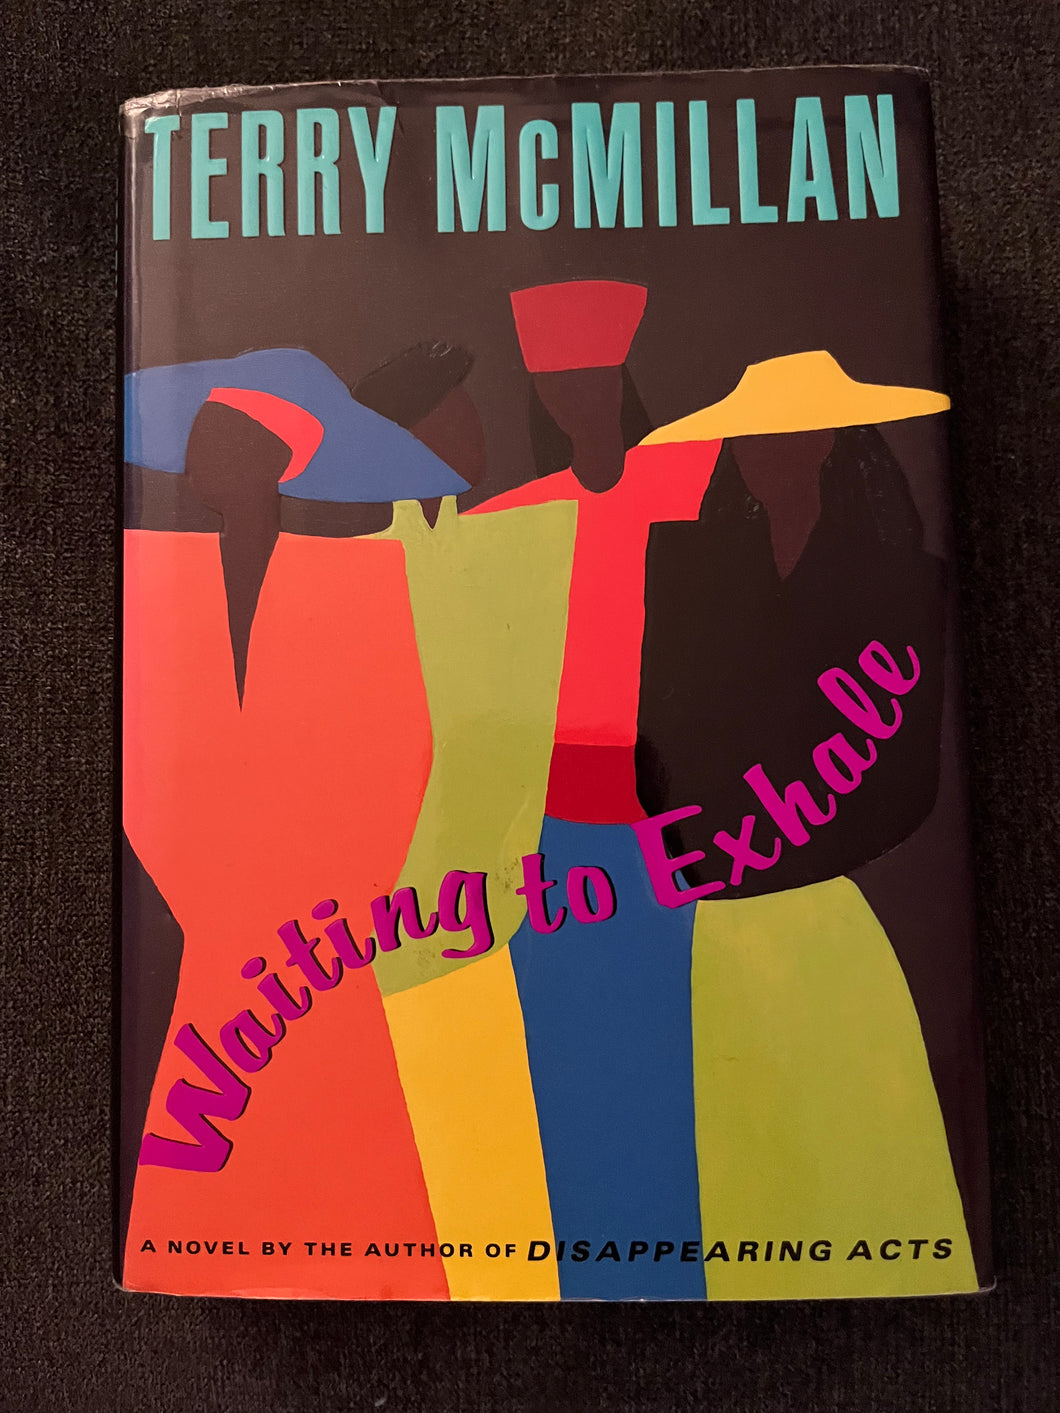 First Edition Waiting to Exhale by Terry McMillan Hardcover Edition